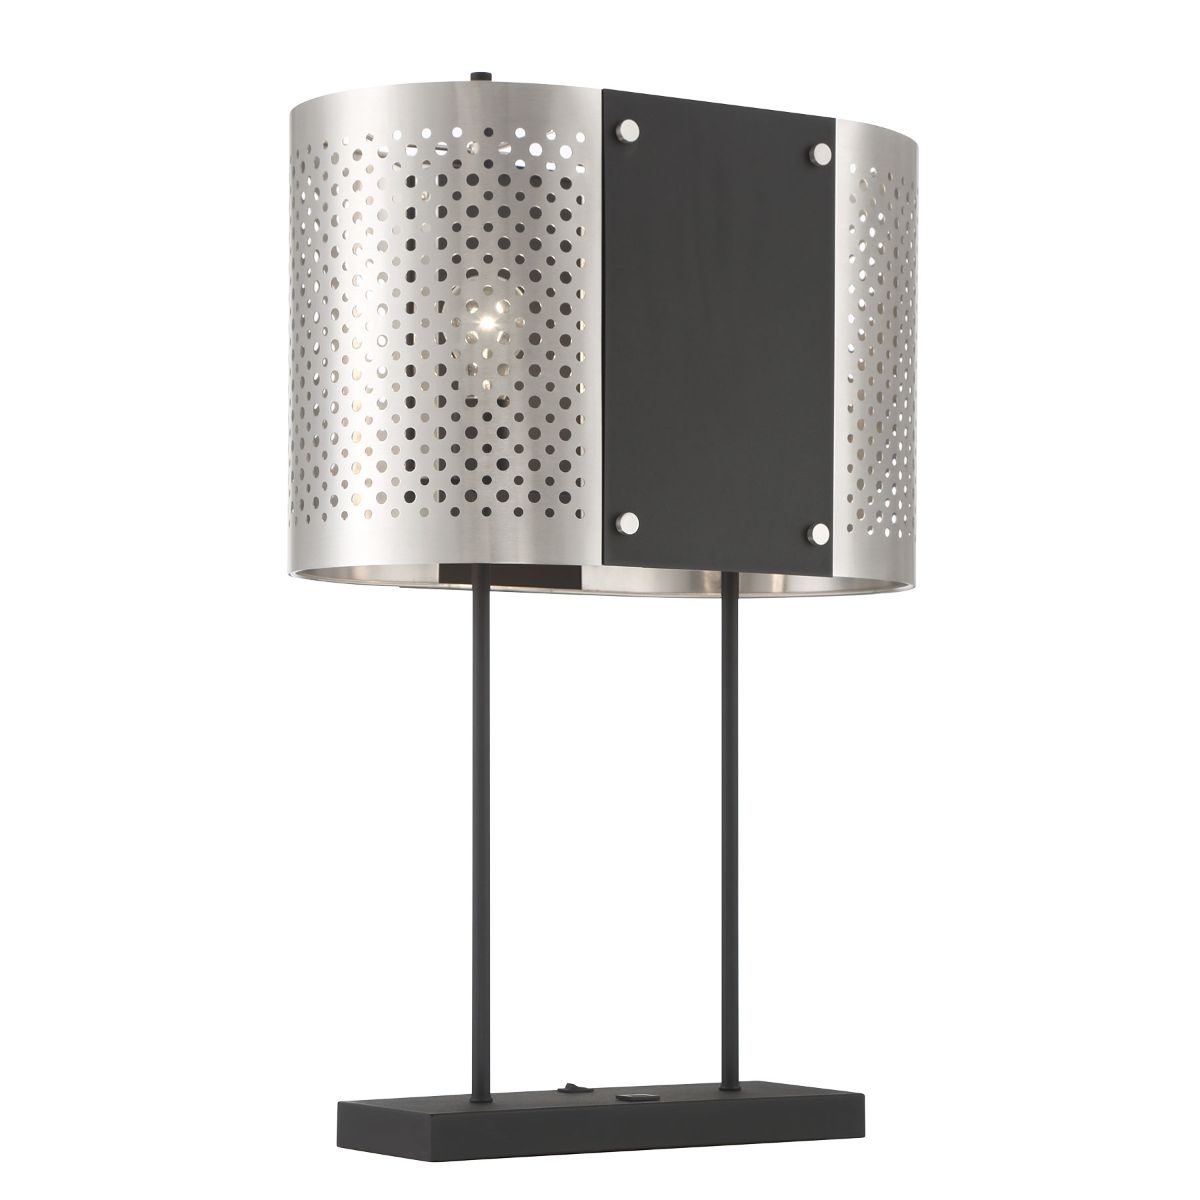 Noho 2 Lights Table Lamp in Steel with a Coal and Brushed Nickel Finish